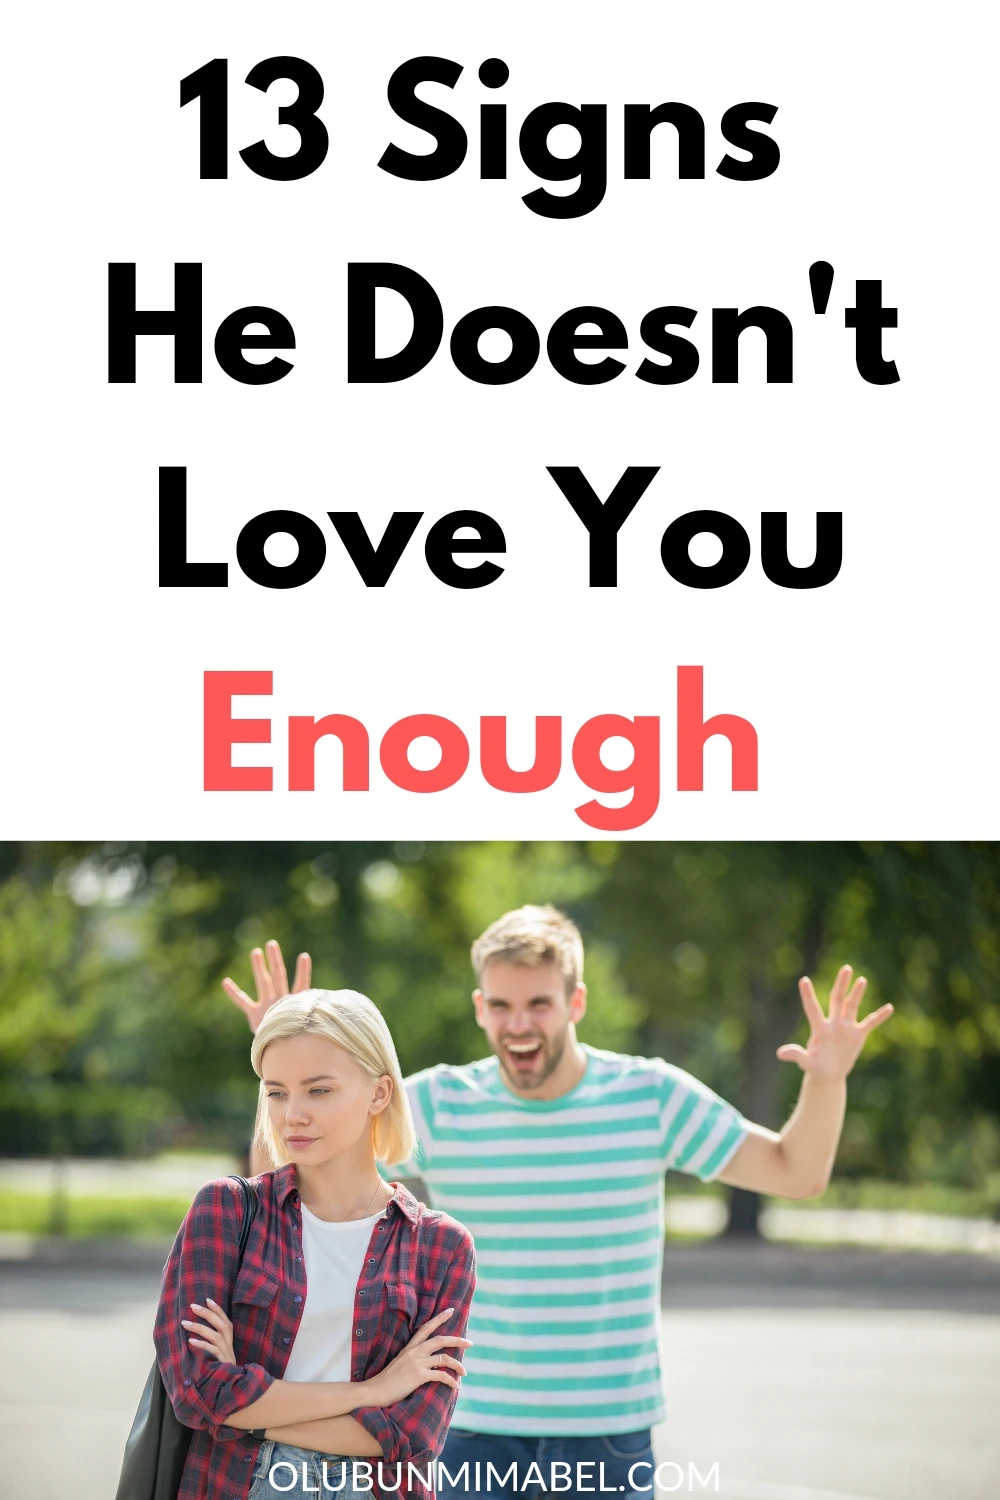 Signs He Doesn't Love You Enough